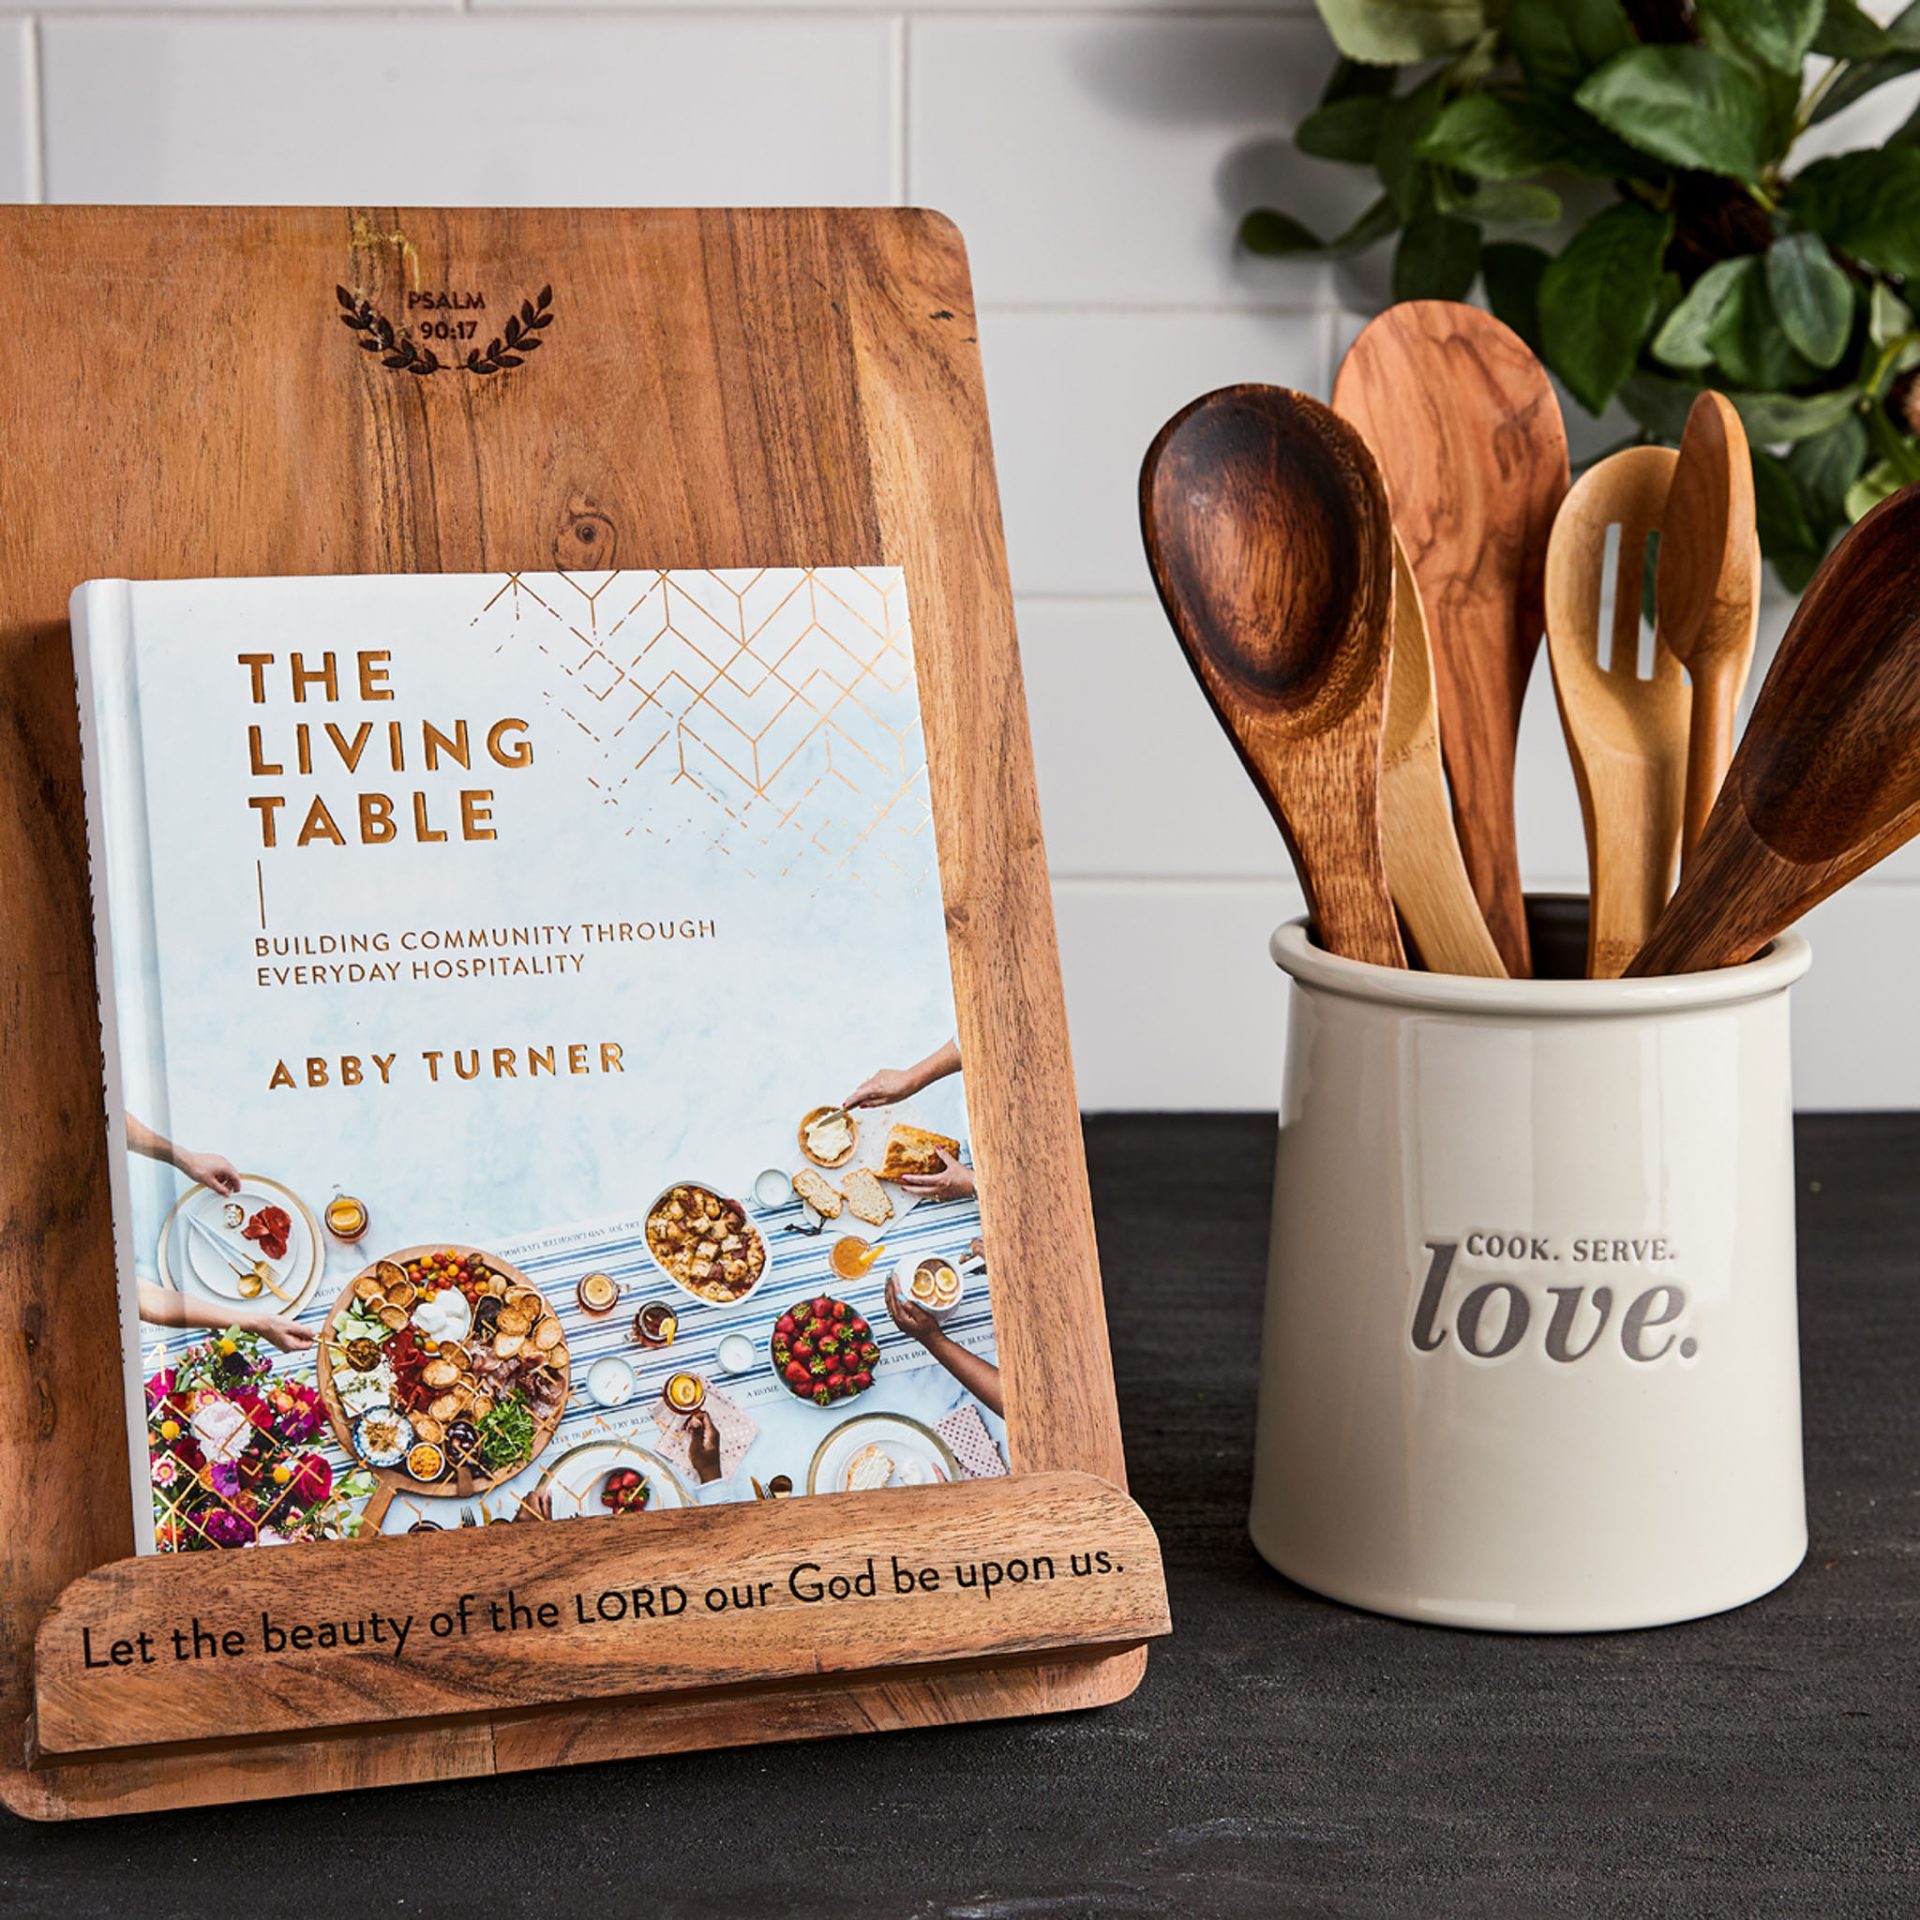 The Living Table cookbook on stand with utensil caddy